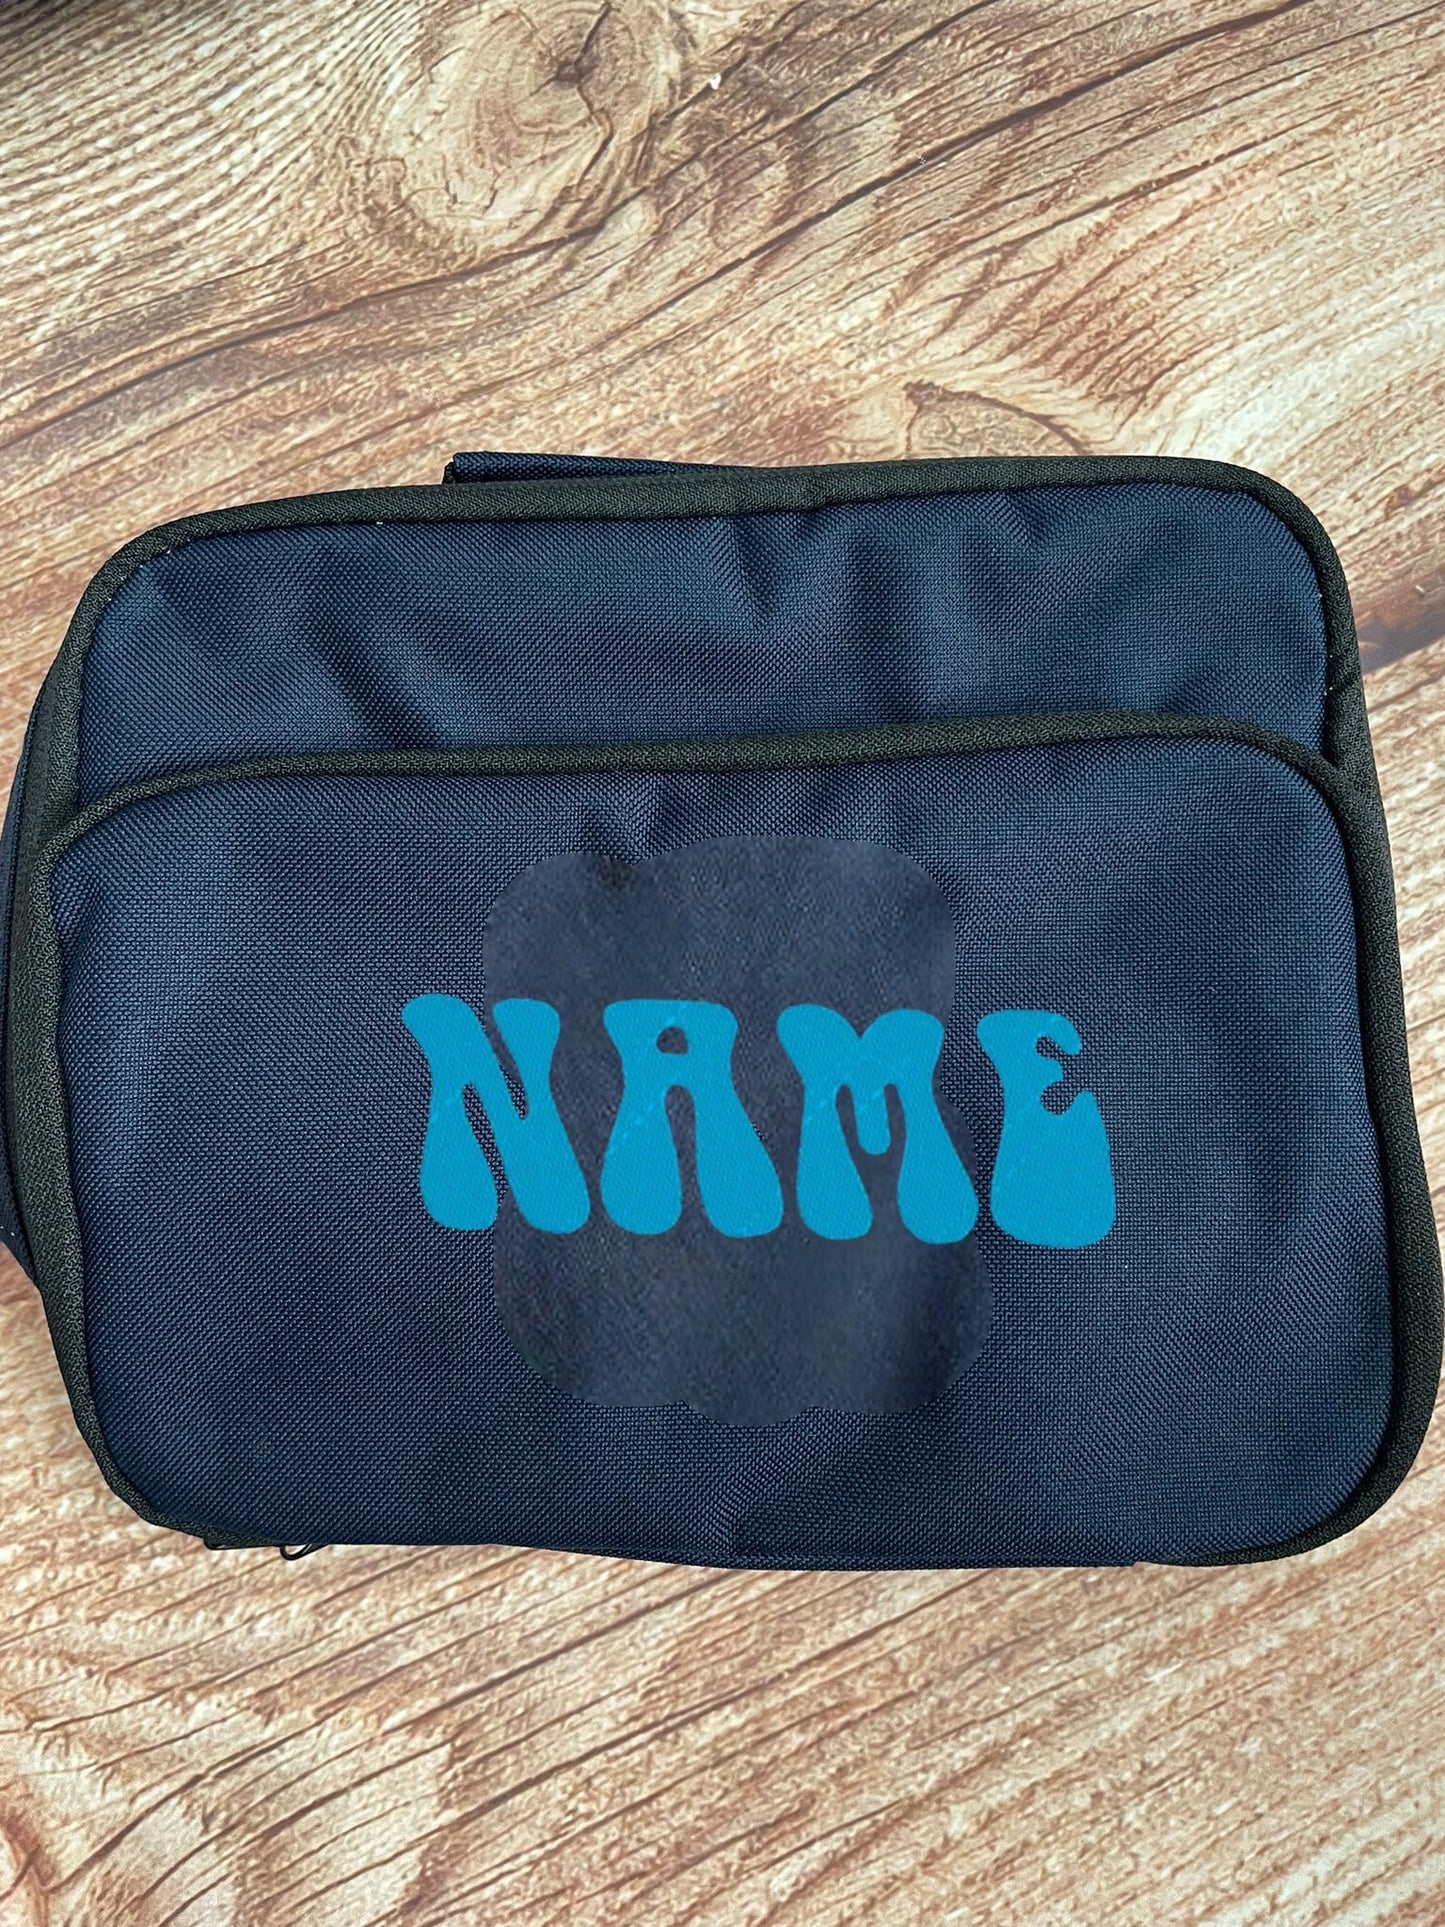 Personalised lunch boxes - Name only